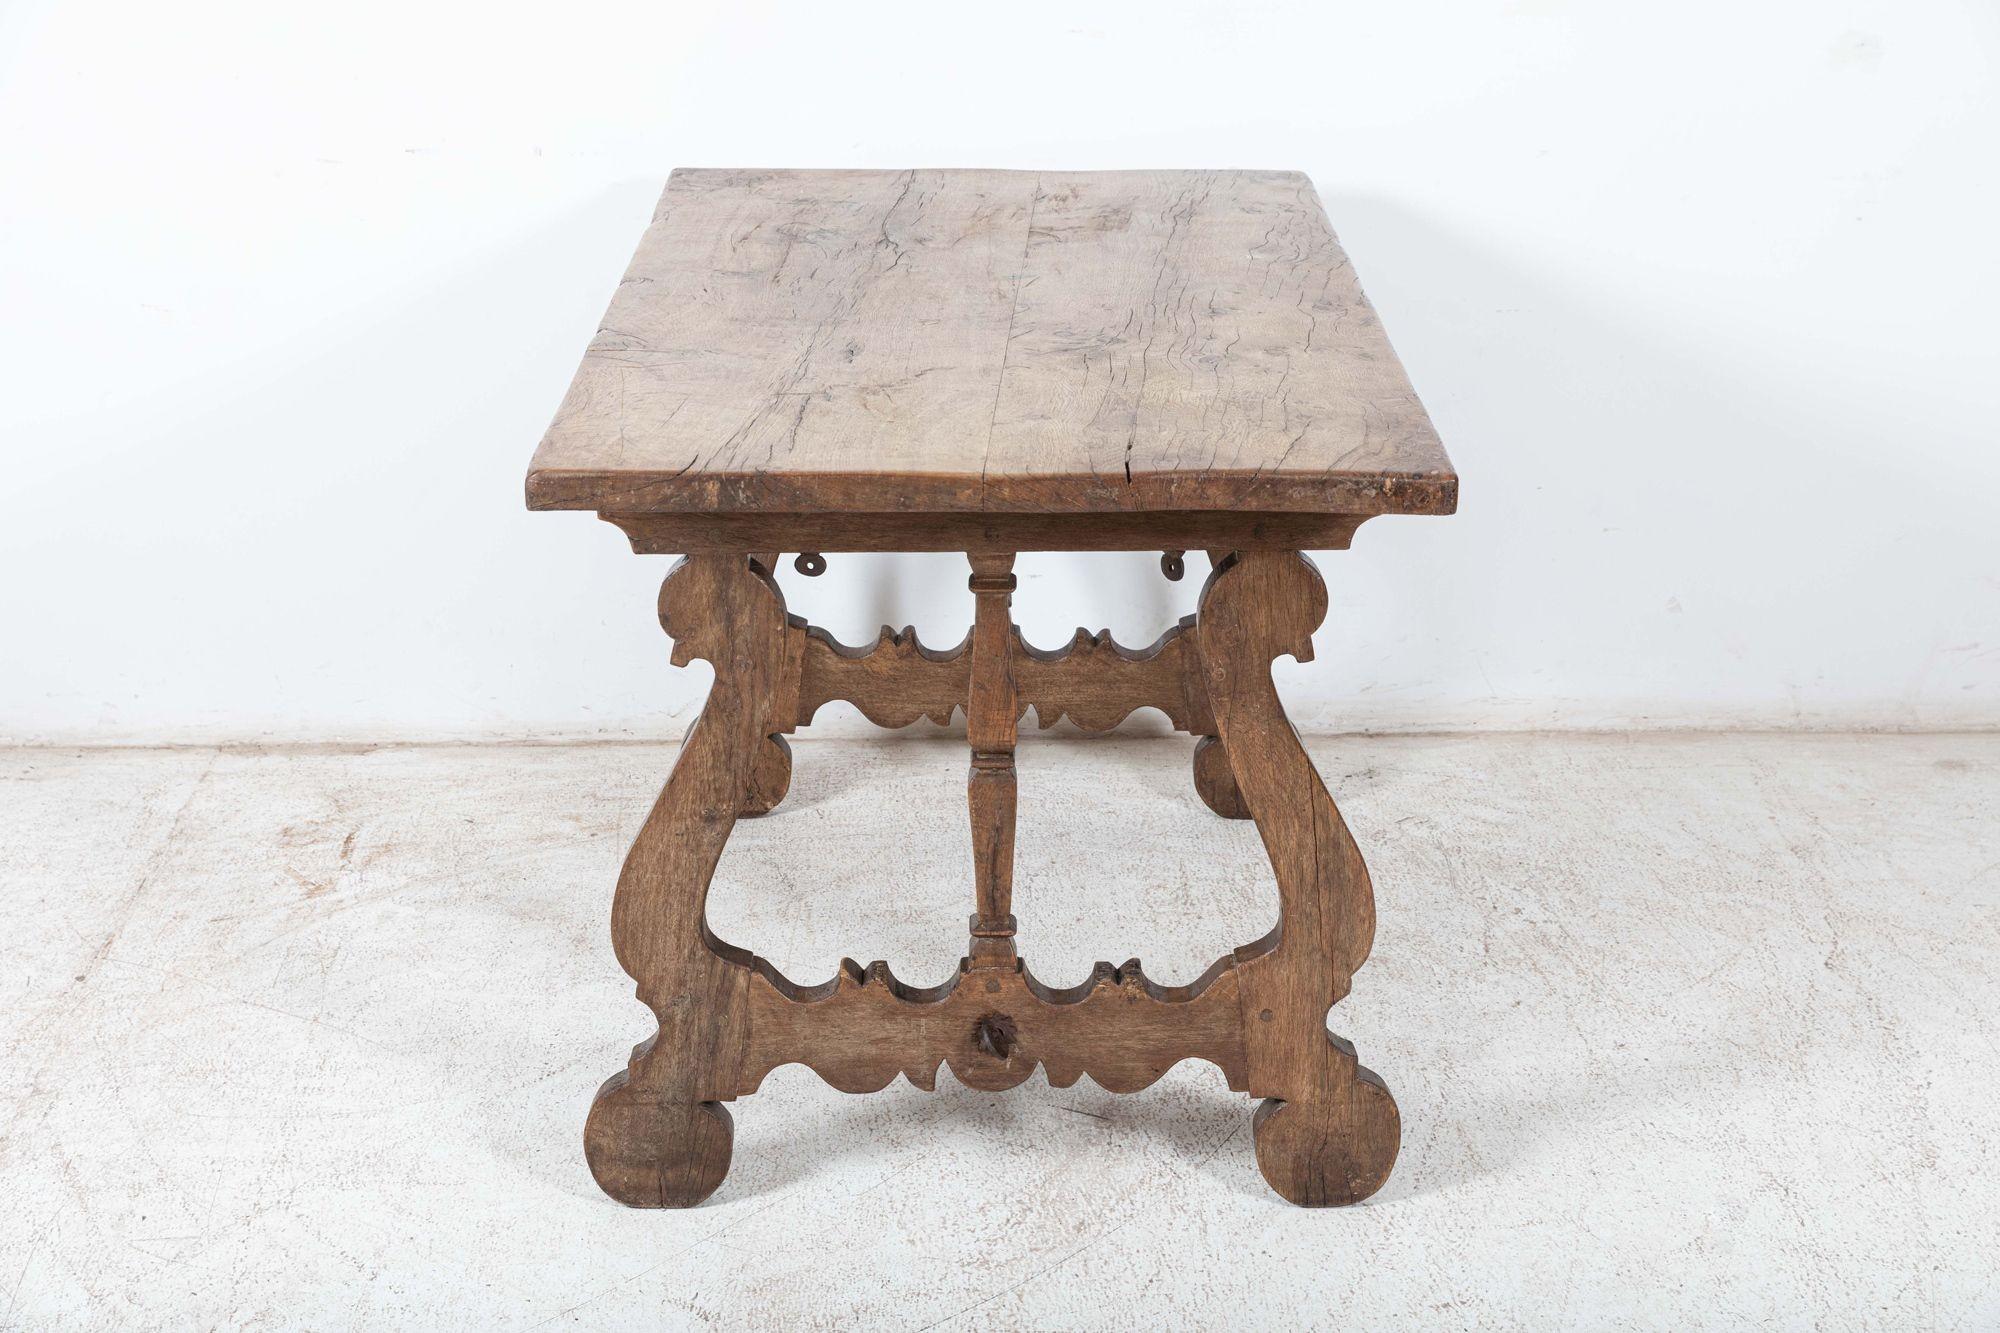 Circa 1850

19th C Spanish walnut trestle table with iron trestle supports

Excellent colour and patination

sku 1004

Measures: W127 x D78 x H79 cm.